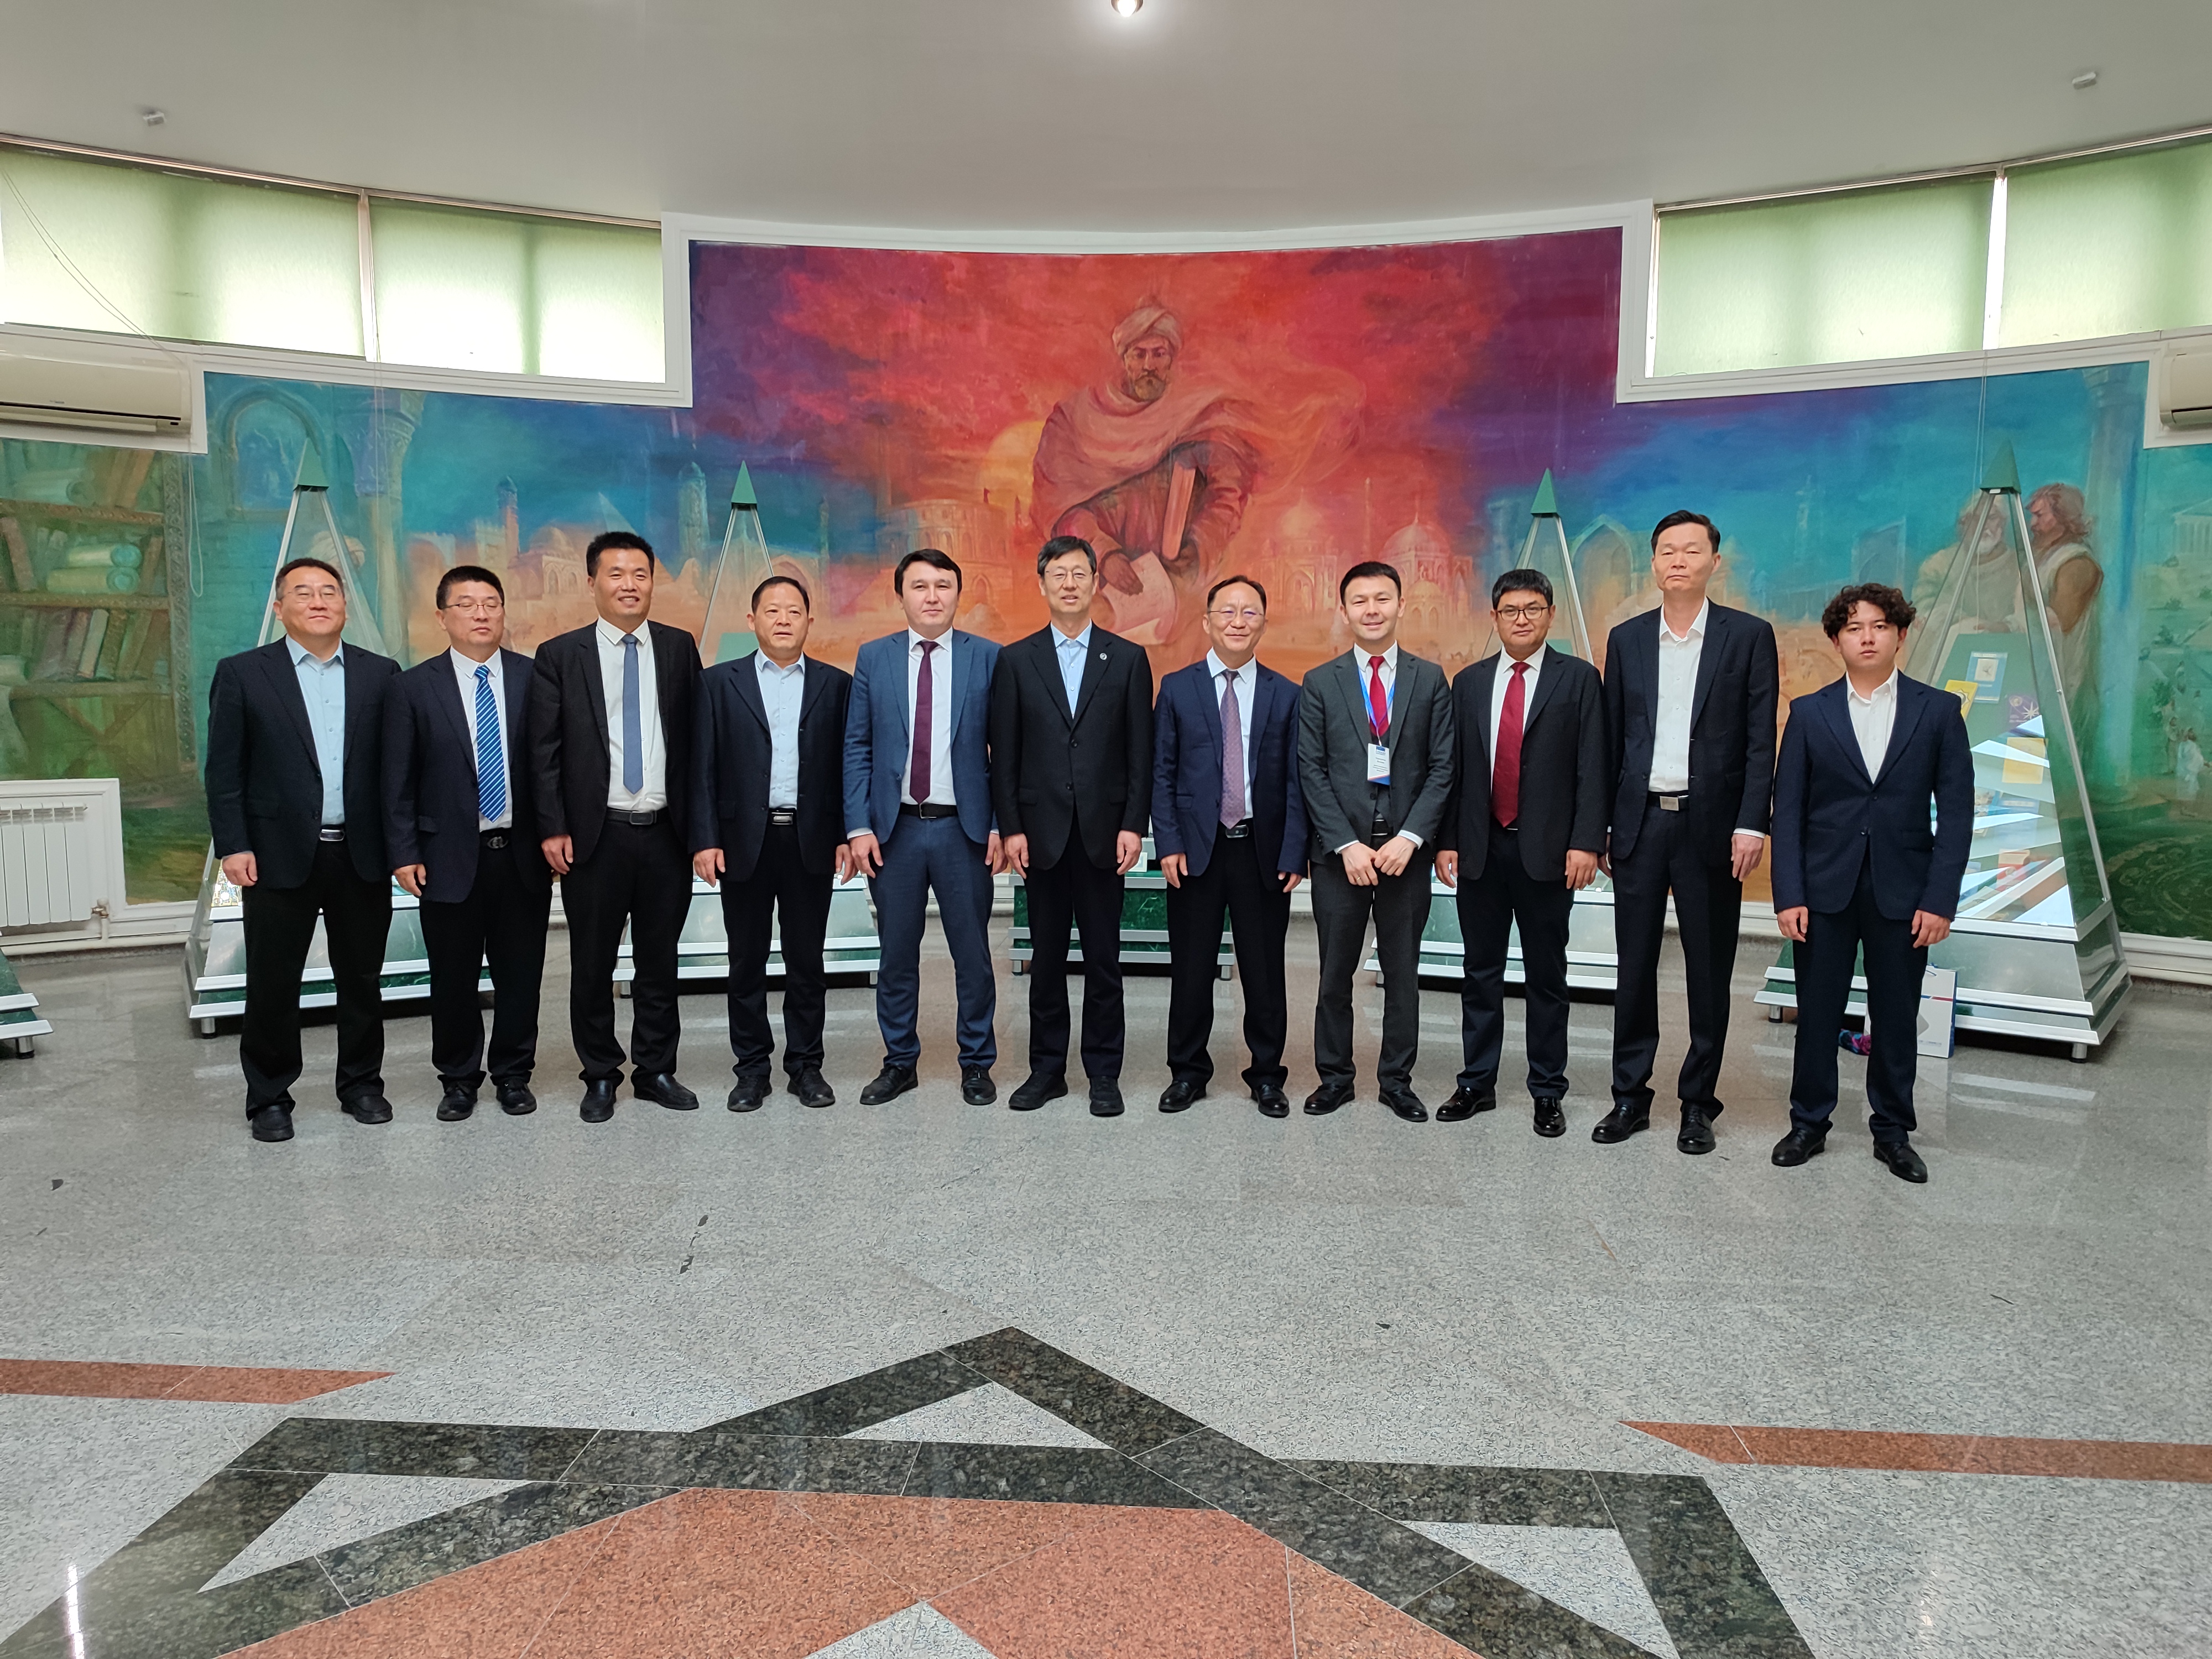 Al-Farabi Kazakh National University with a working visit visited the delegation of Scientific and Technical Bureau in Jinan, China and representatives of Powerchina Sepco1 Electric Power Construction Co.Ltd.